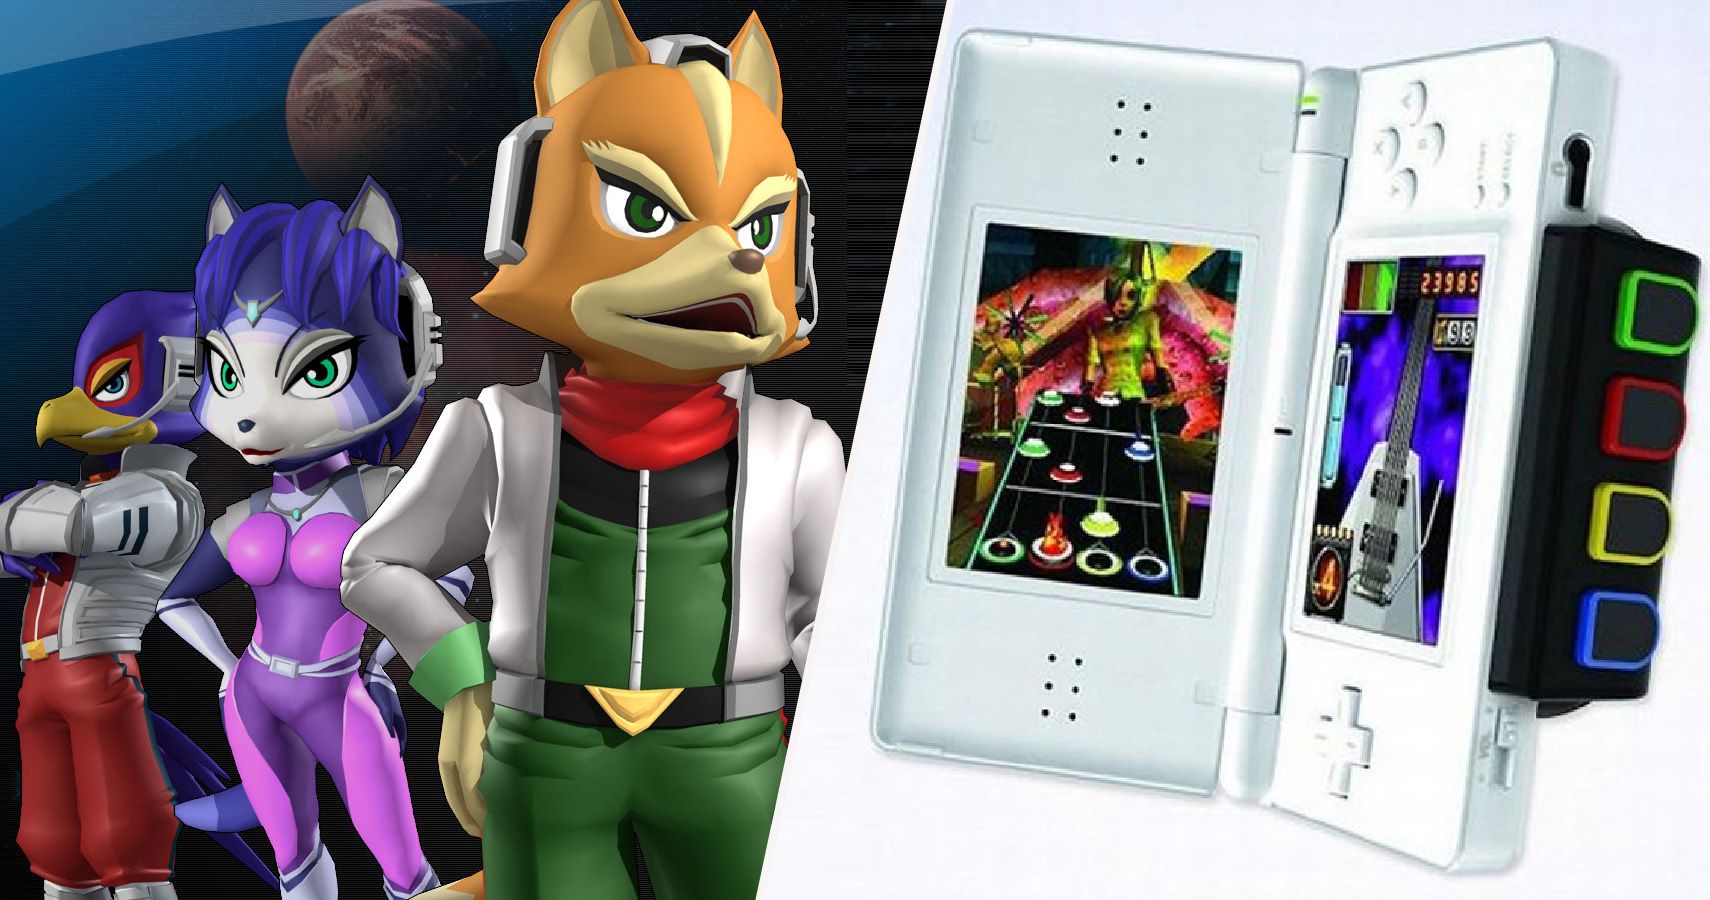 Best Buy: Star Fox Command — PRE-OWNED Nintendo DS